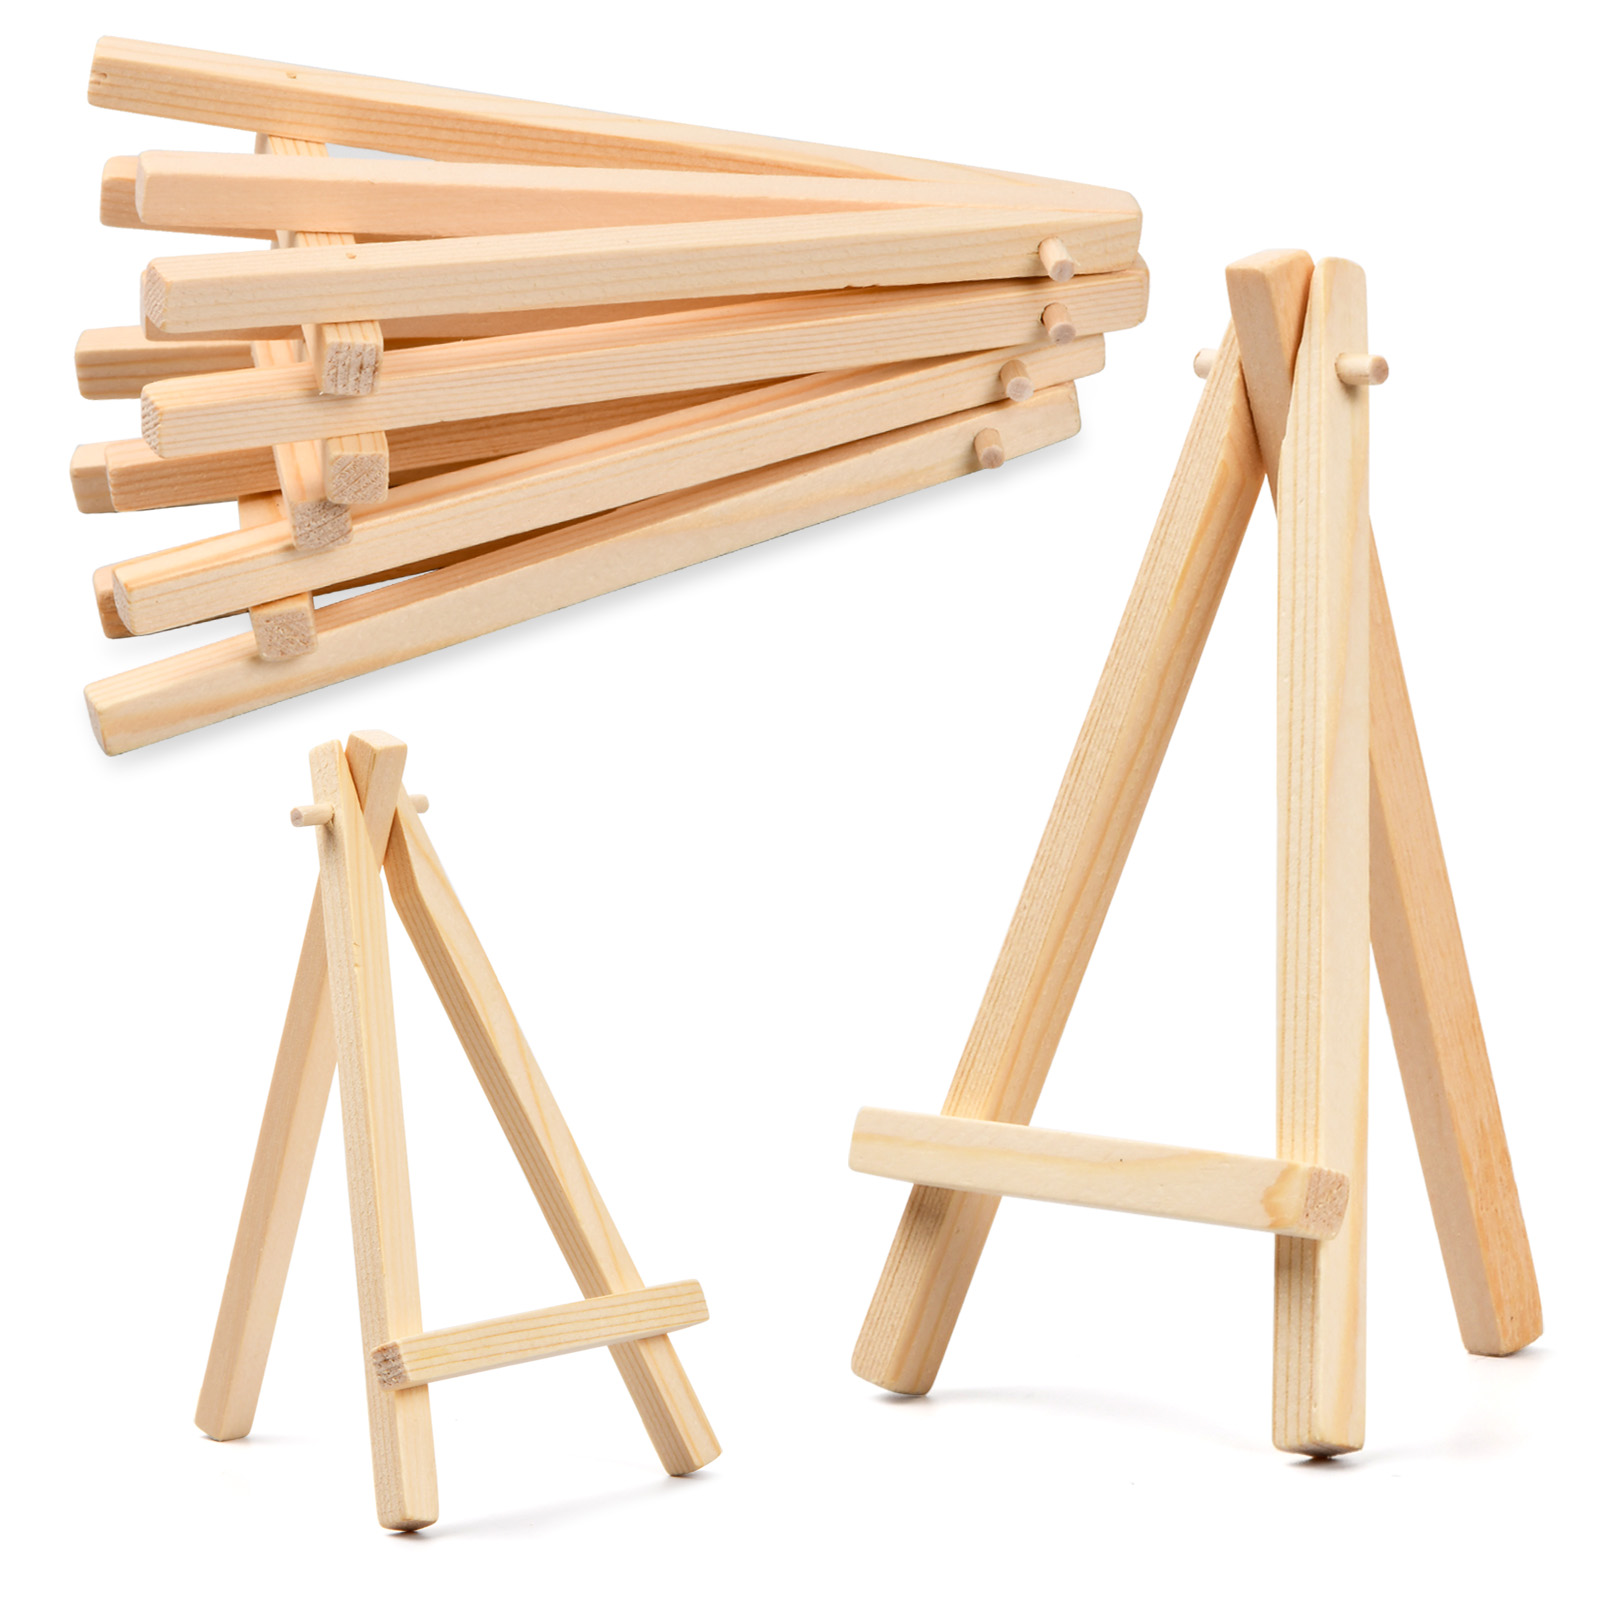 Tabletop Picture Easel